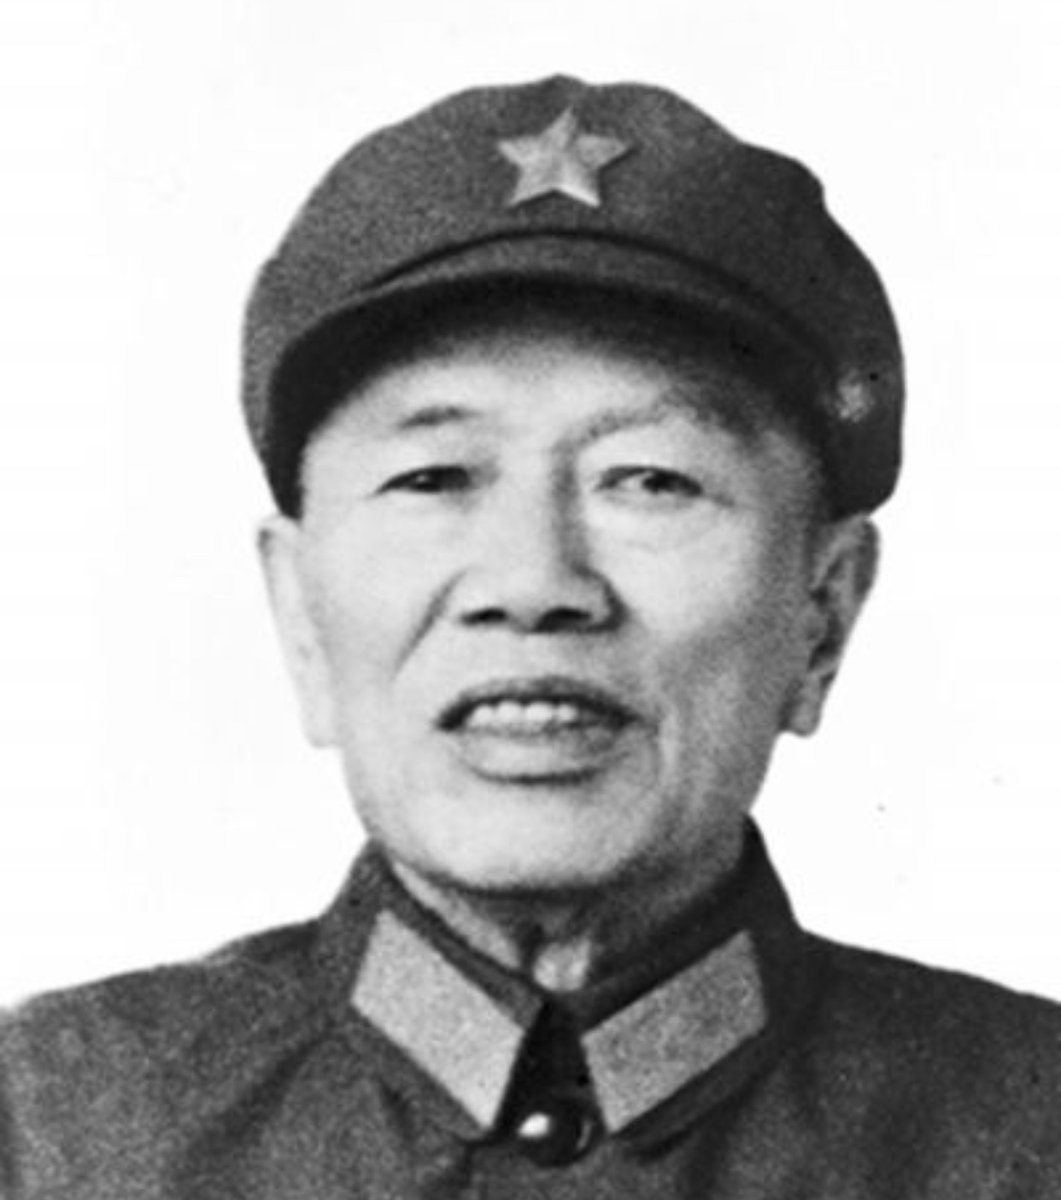 37) Deng Hua, of communist Northeastern (4th) Field Army, who led his troops in its epic campaign from freezing hinterlands of Manchuria to tropical island of Hainan; commanded amphibious invasion of latter. Later, in 1952, became 2nd commander of Chinese forces in Korean War.